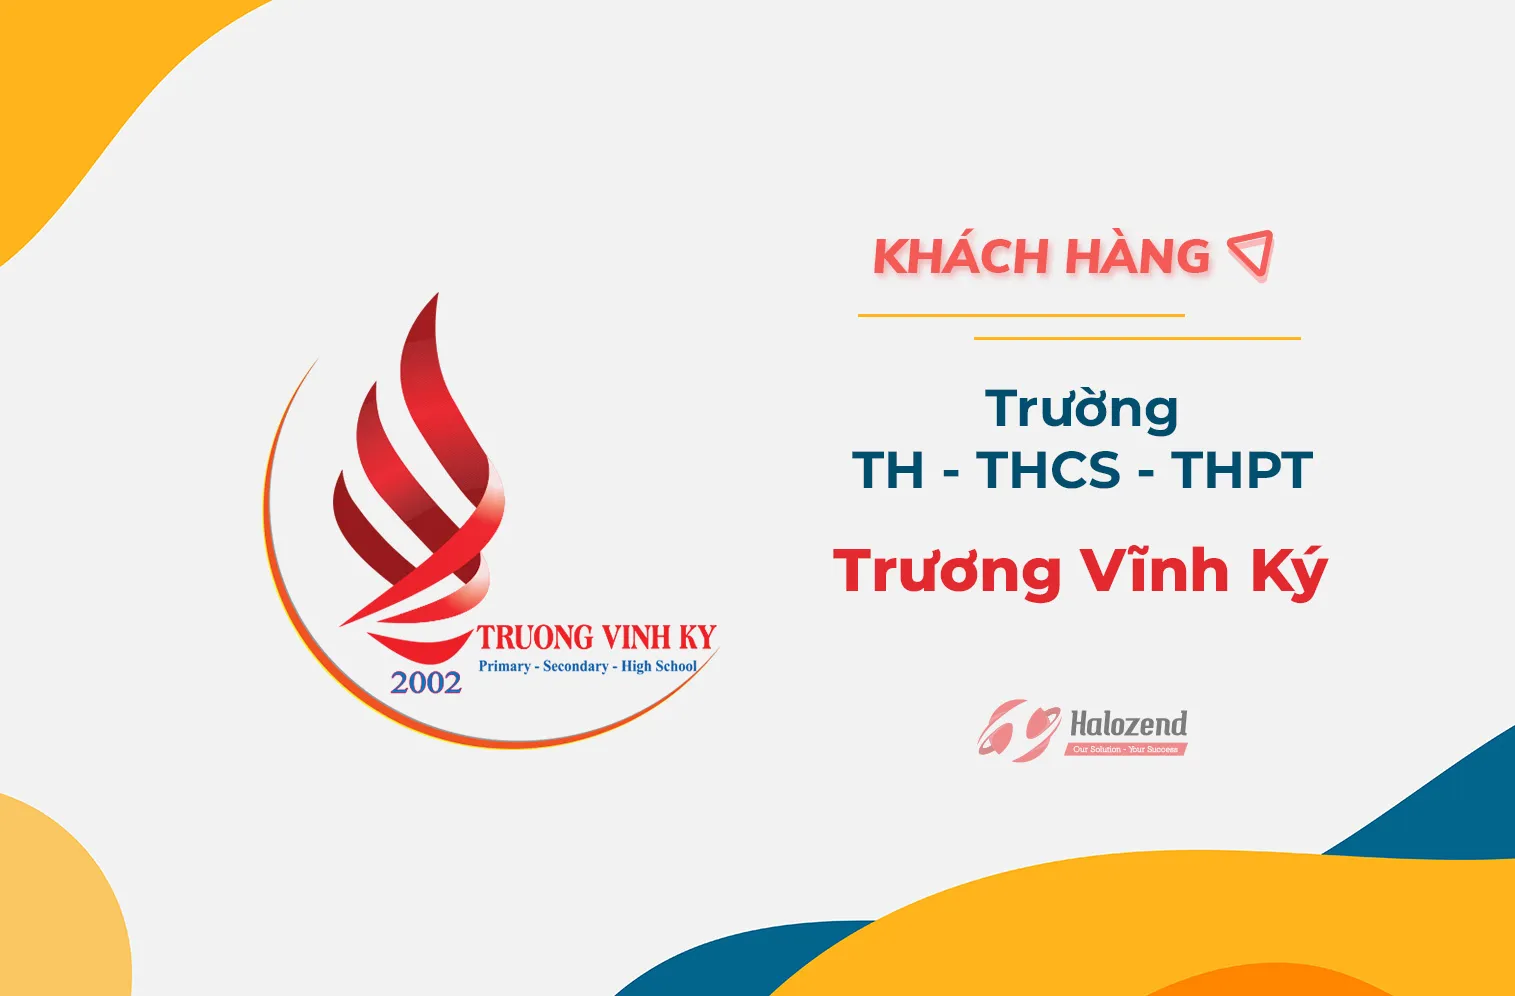 truong th thcs thpt truong vinh ky